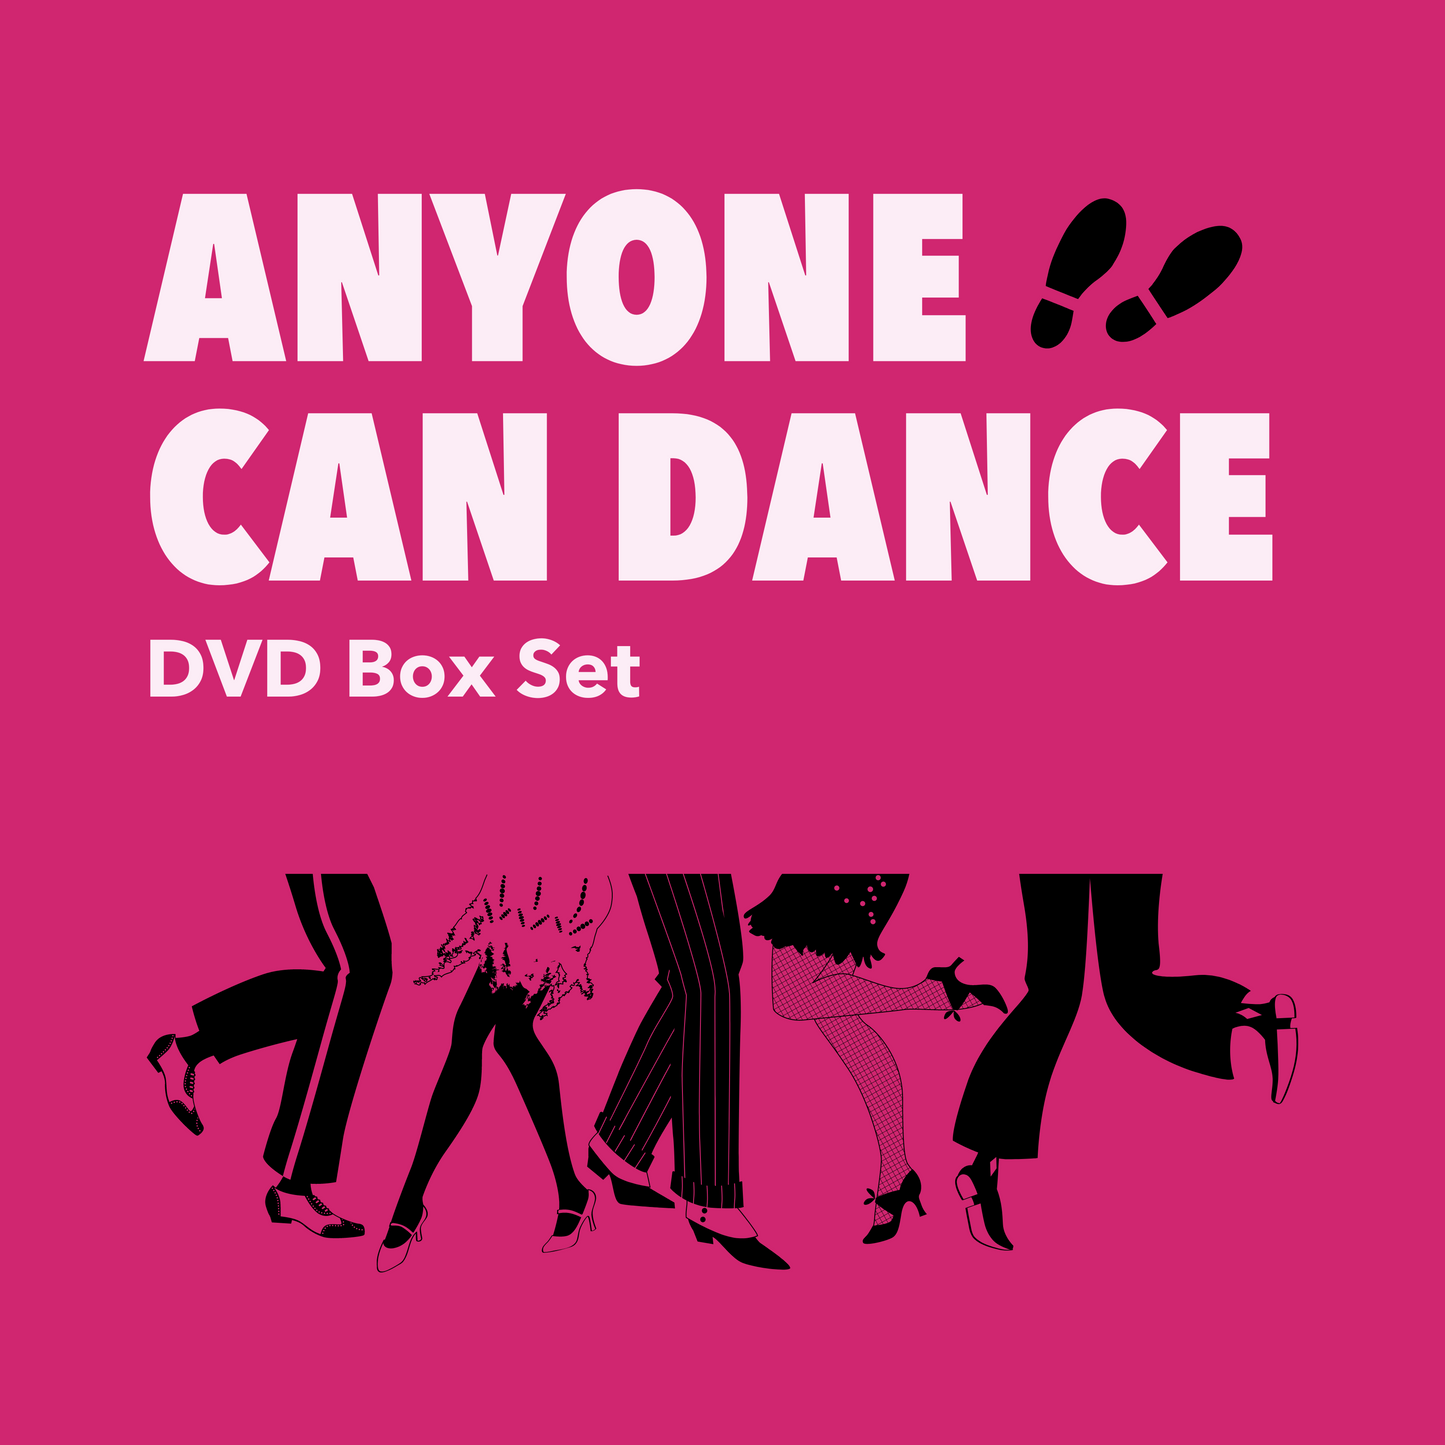 Anyone Can Dance DVD Box set featuring 10 DVDs.